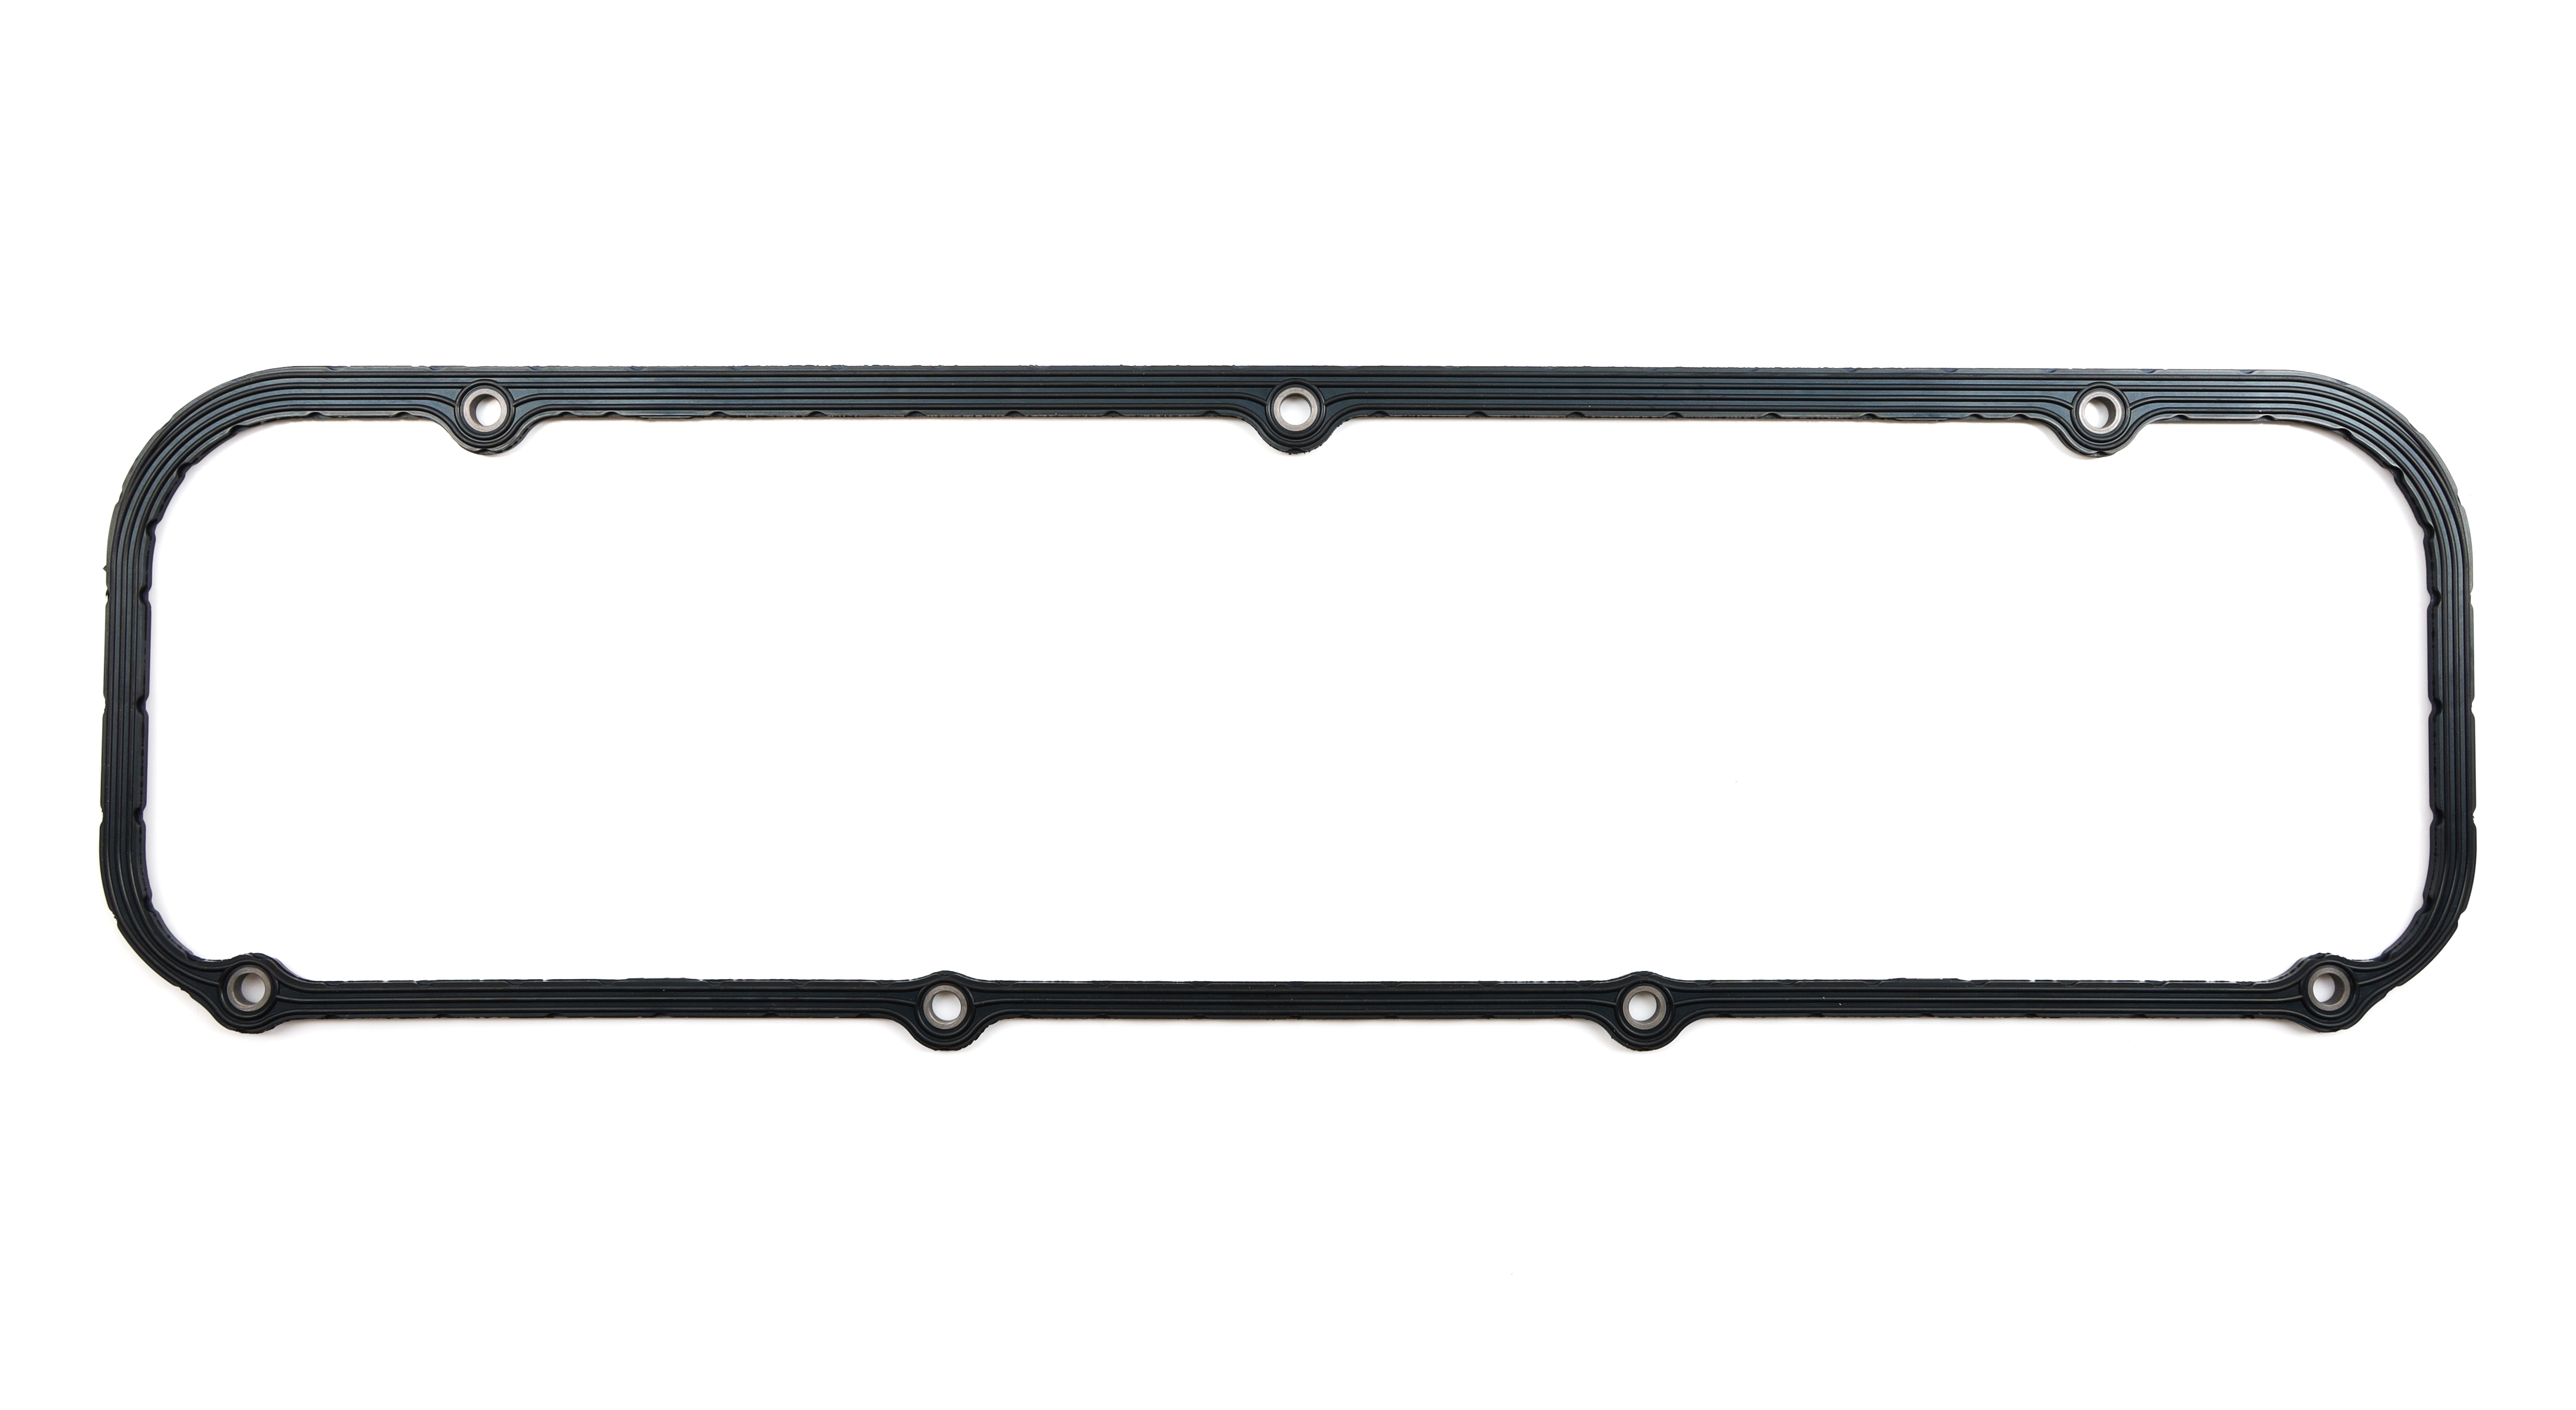 Cometic Gaskets C15467 - Valve Cover Gasket, 0.188 in Thick, Steel Core Silicone Rubber, Big Block Ford, Each